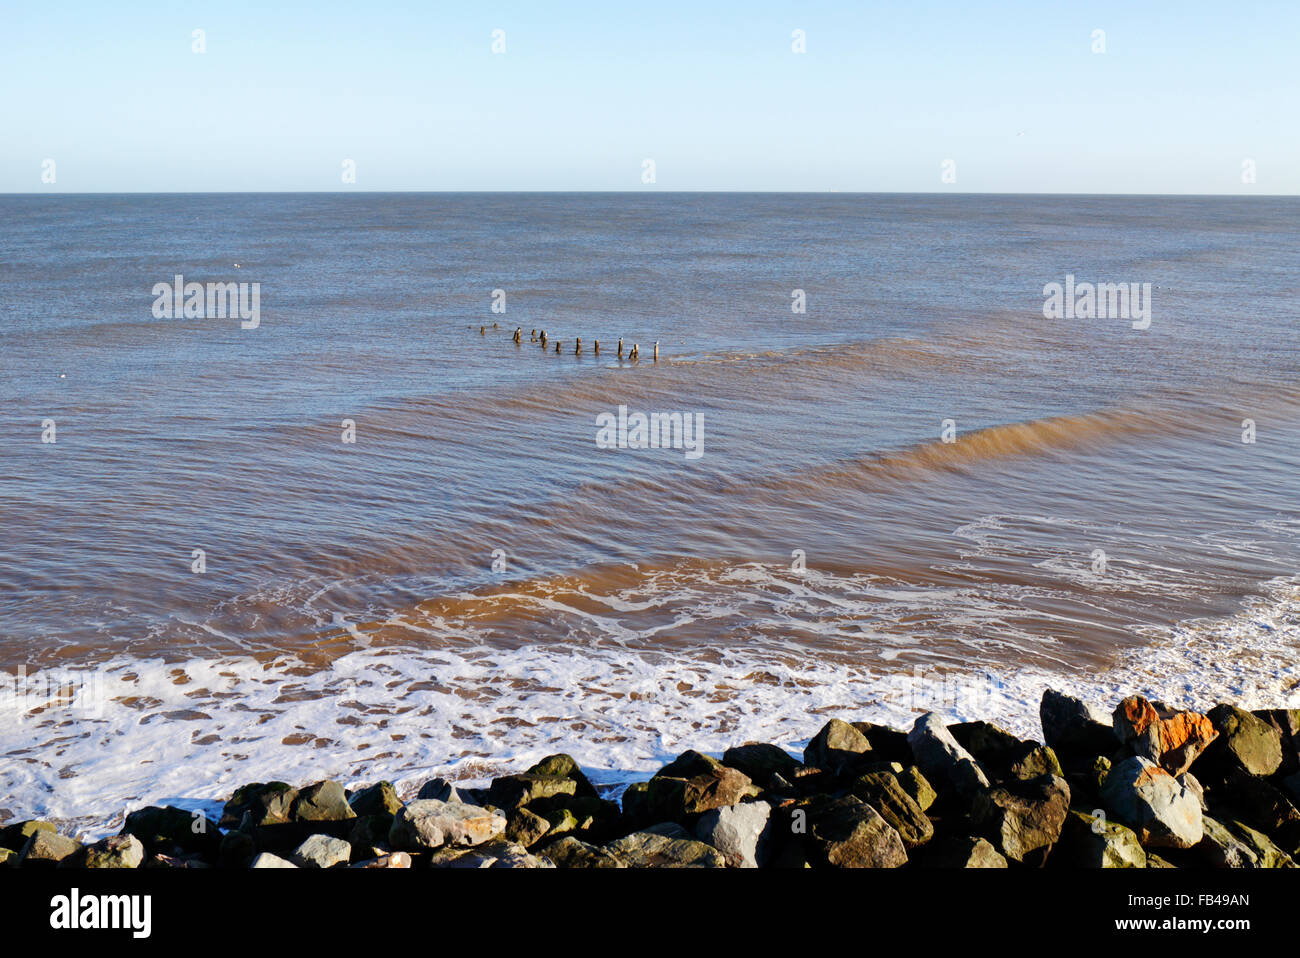 A view of rock armour sea defences with old groyne posts showing offshore at Happisburgh, Norfolk, England, United Kingdom. Stock Photo